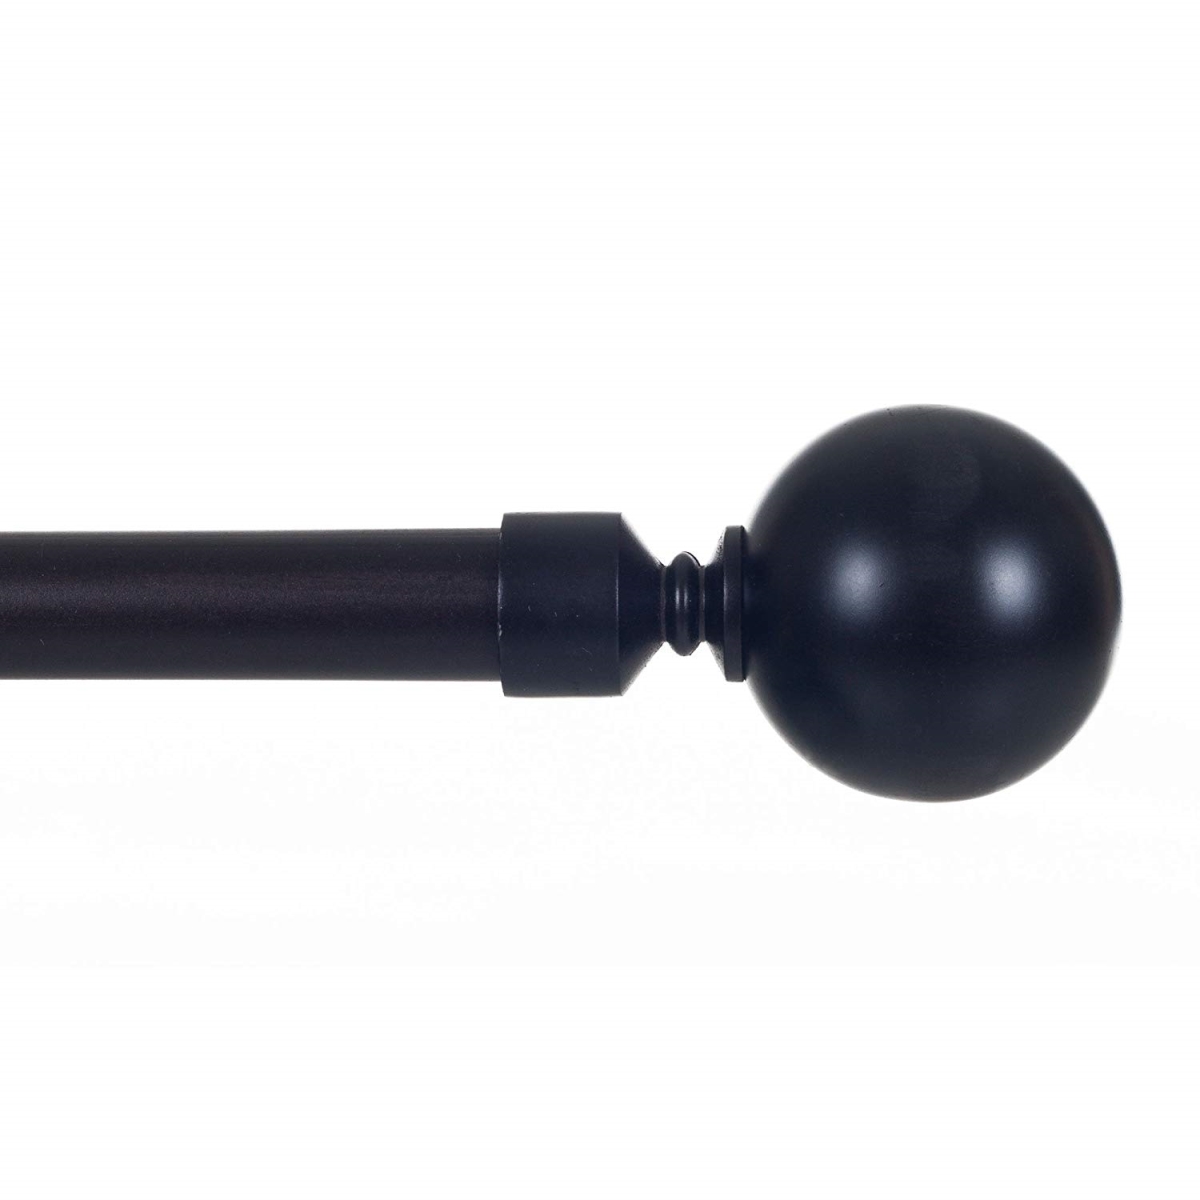 63a-02982 Sphere Curtain Rod, Rubbed Bronze - 62-144 In., 0.75 In.